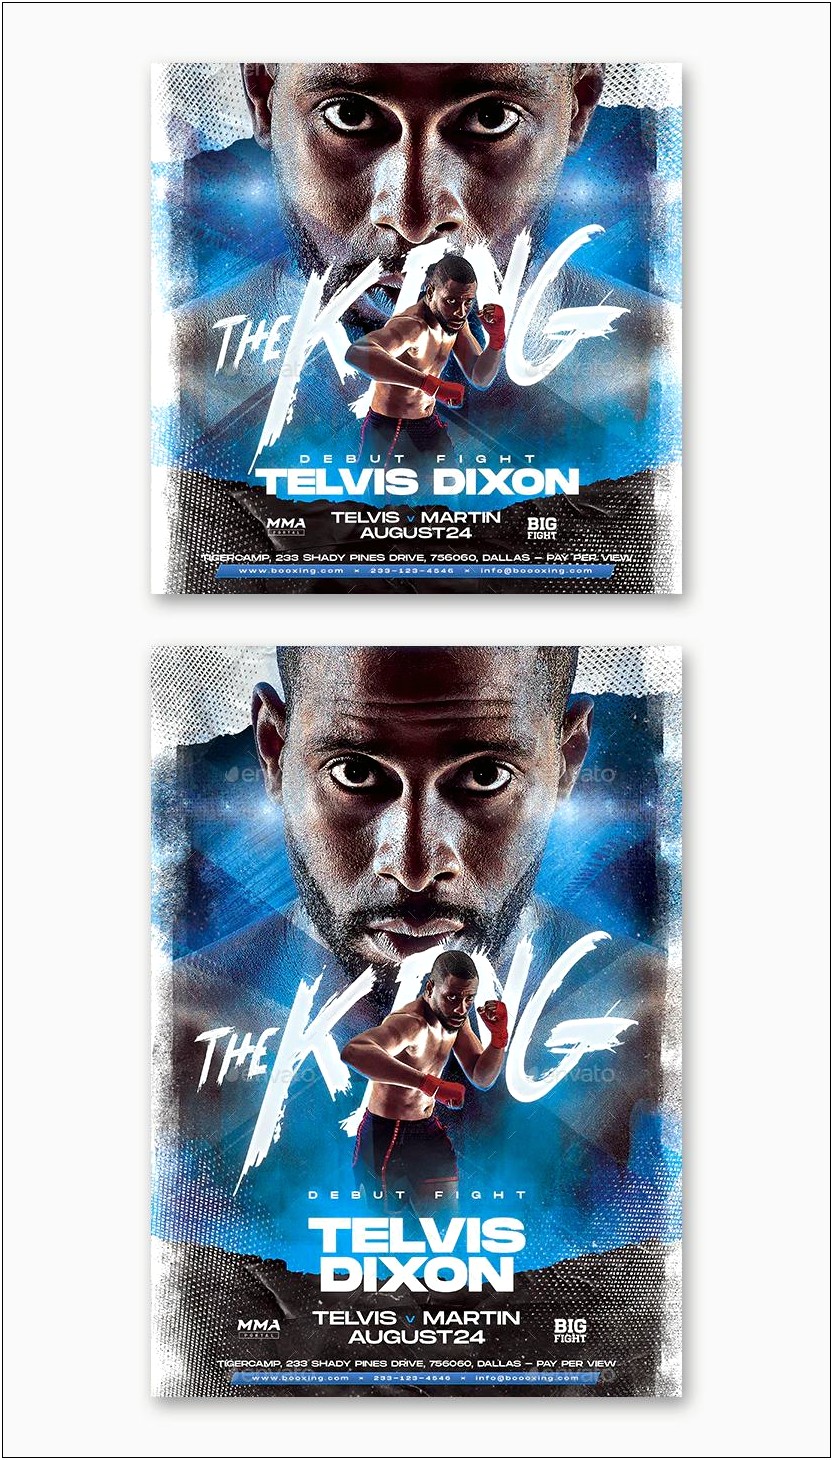 Boxing Event Free Flyer Psd Template